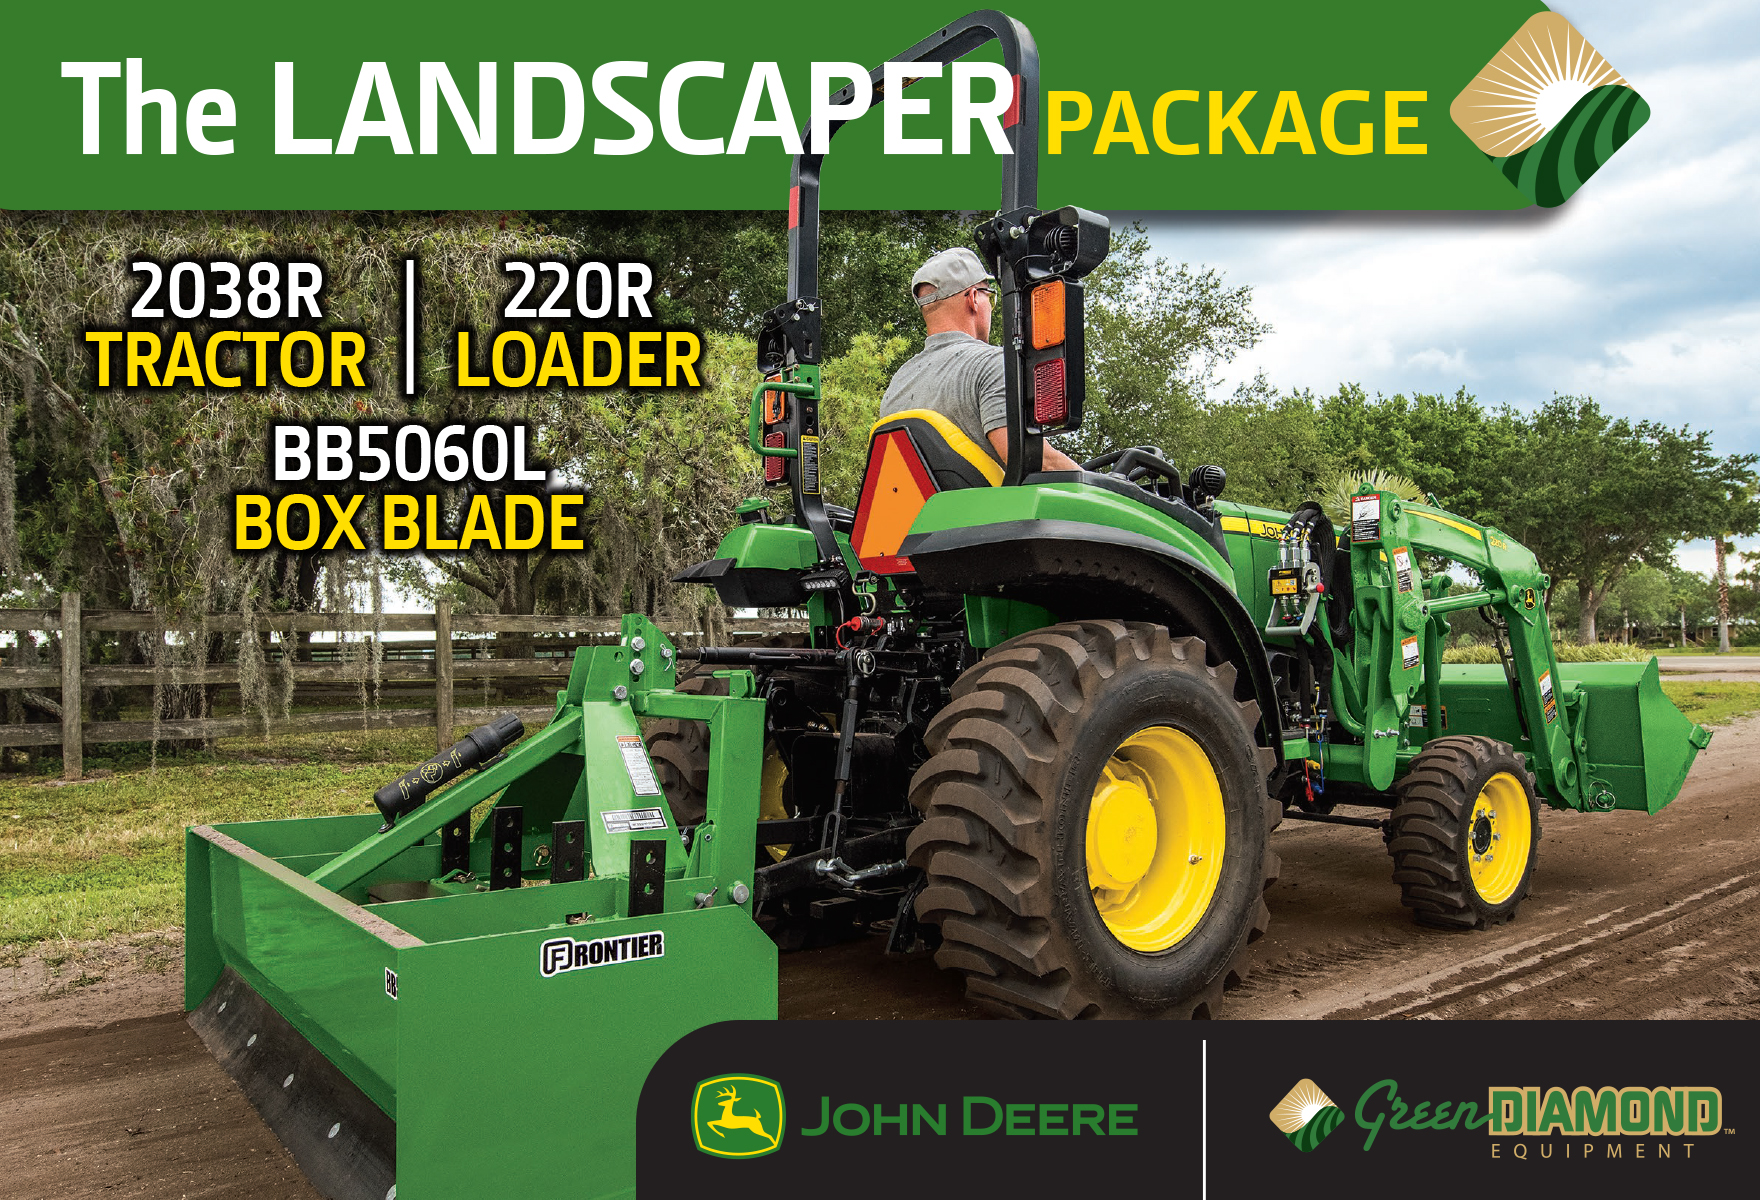 The Landscaper Package